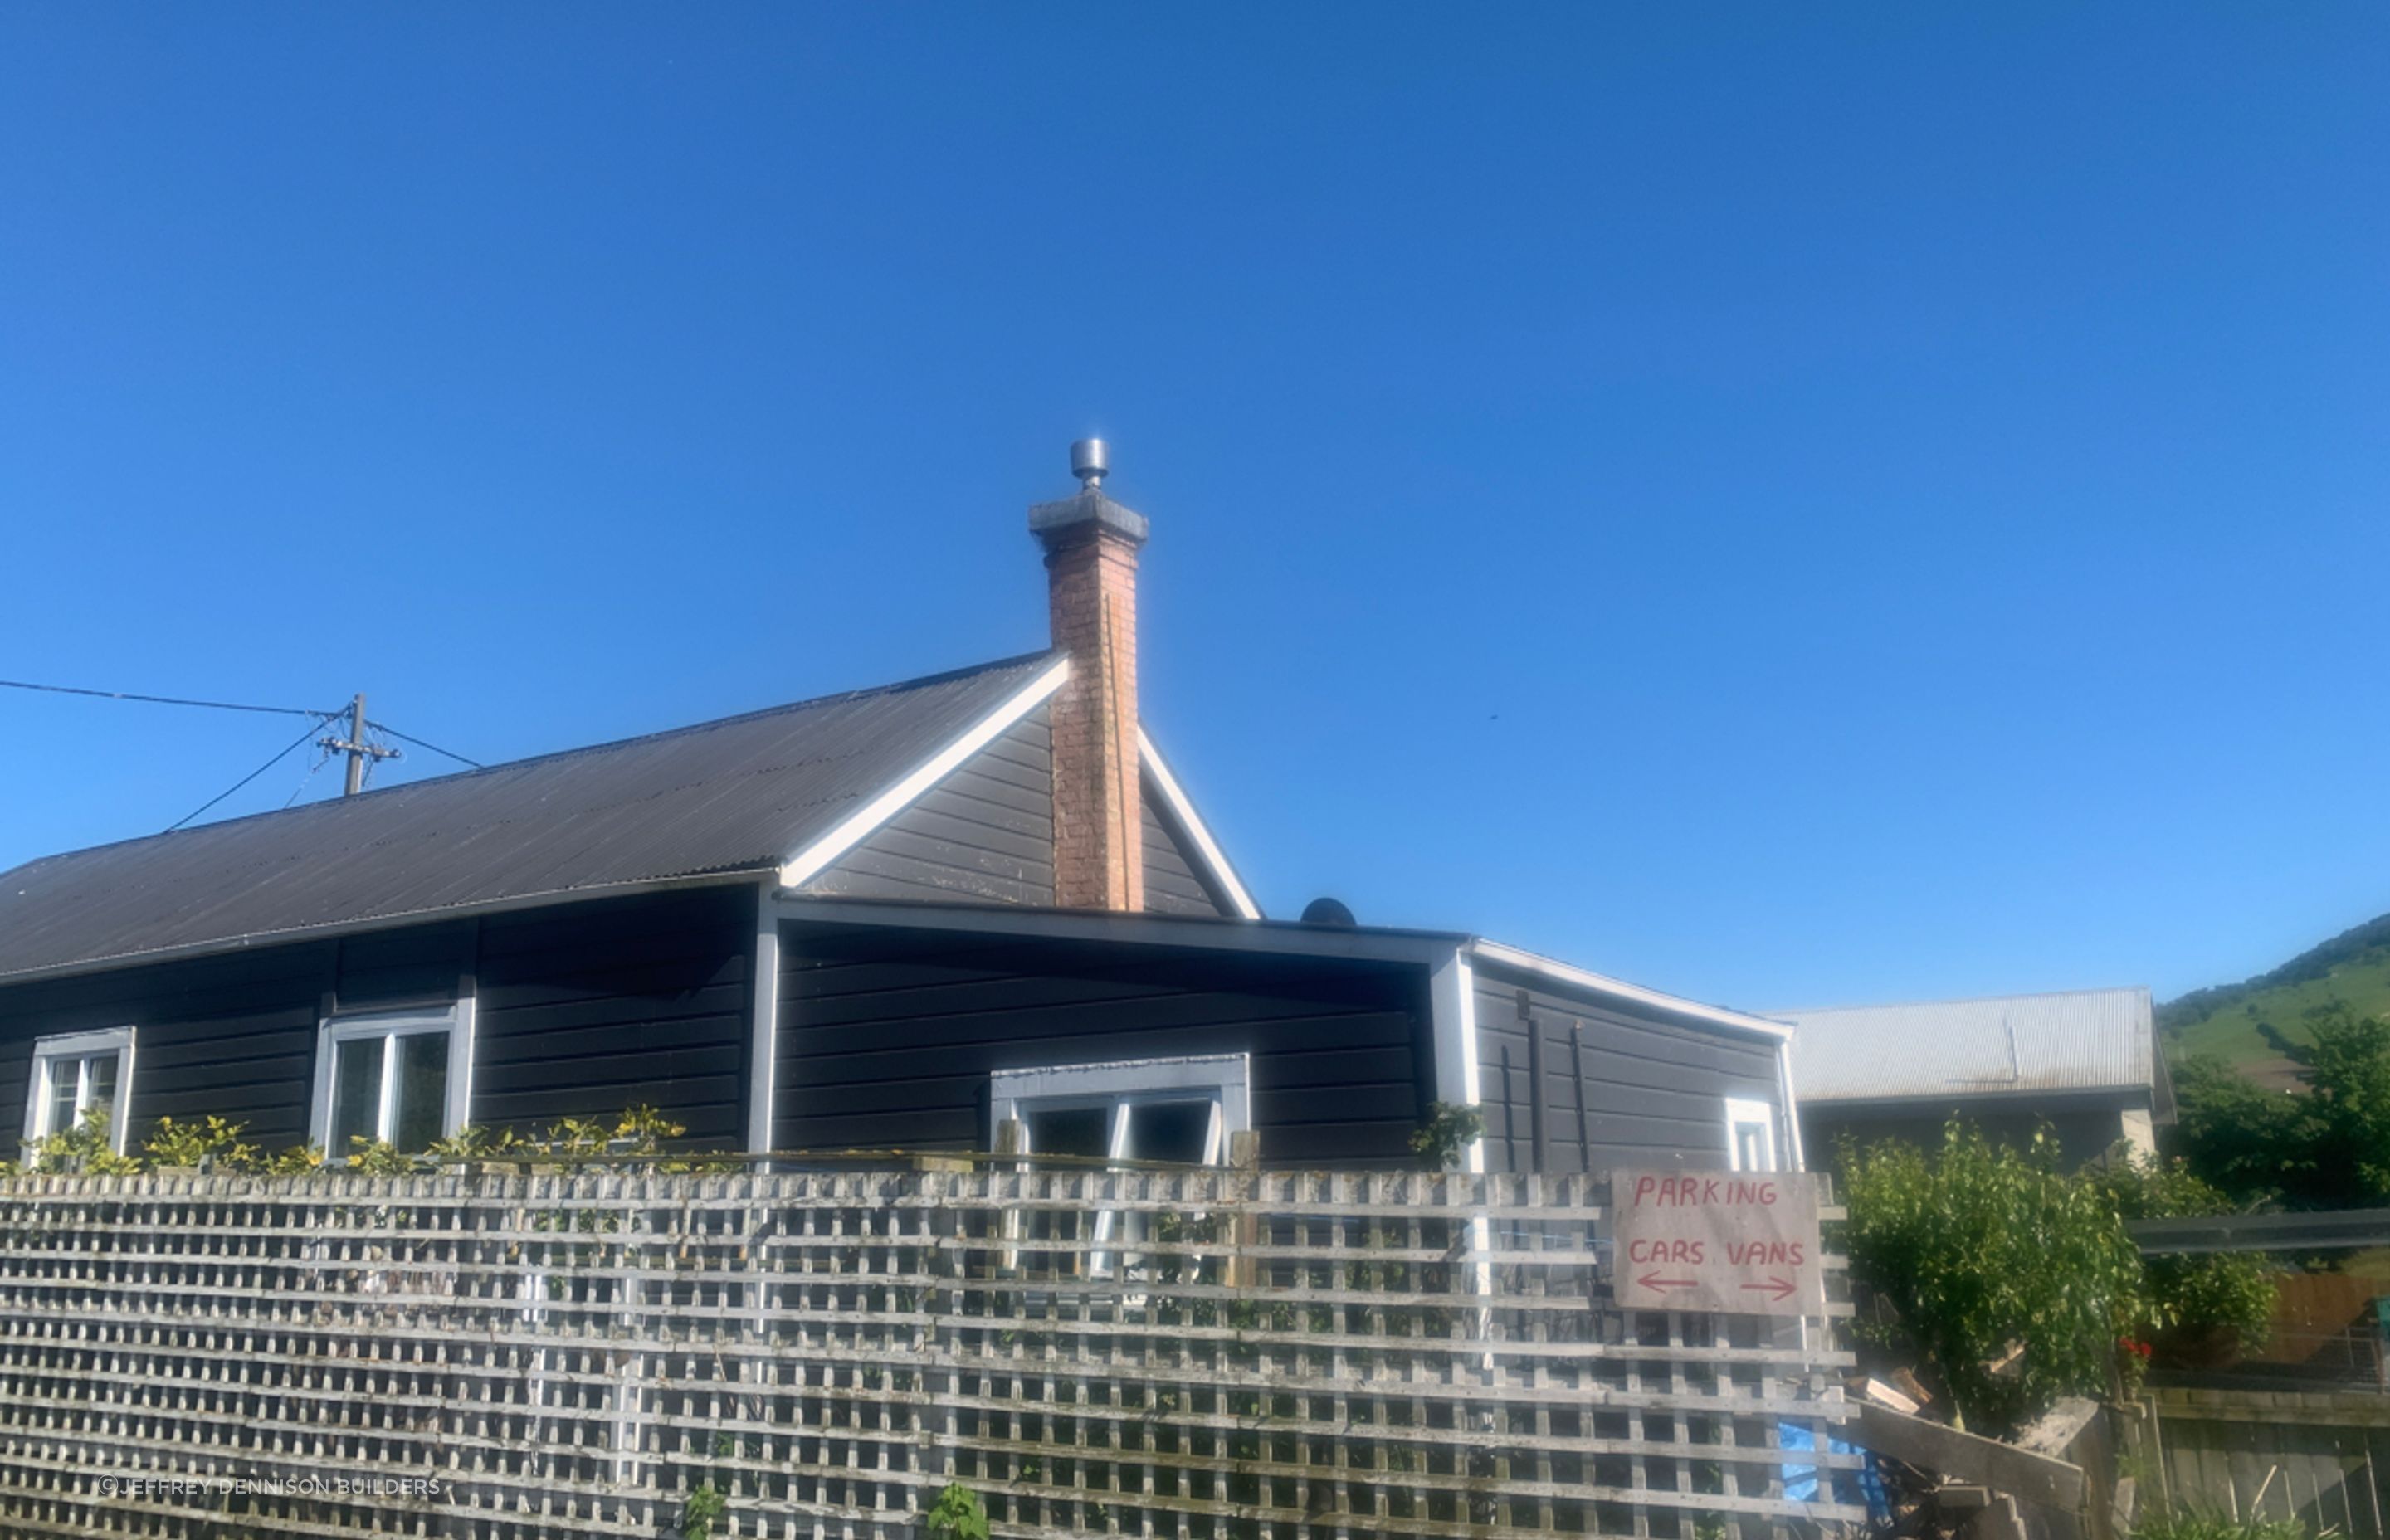 Original roofing in need of urgent replacement